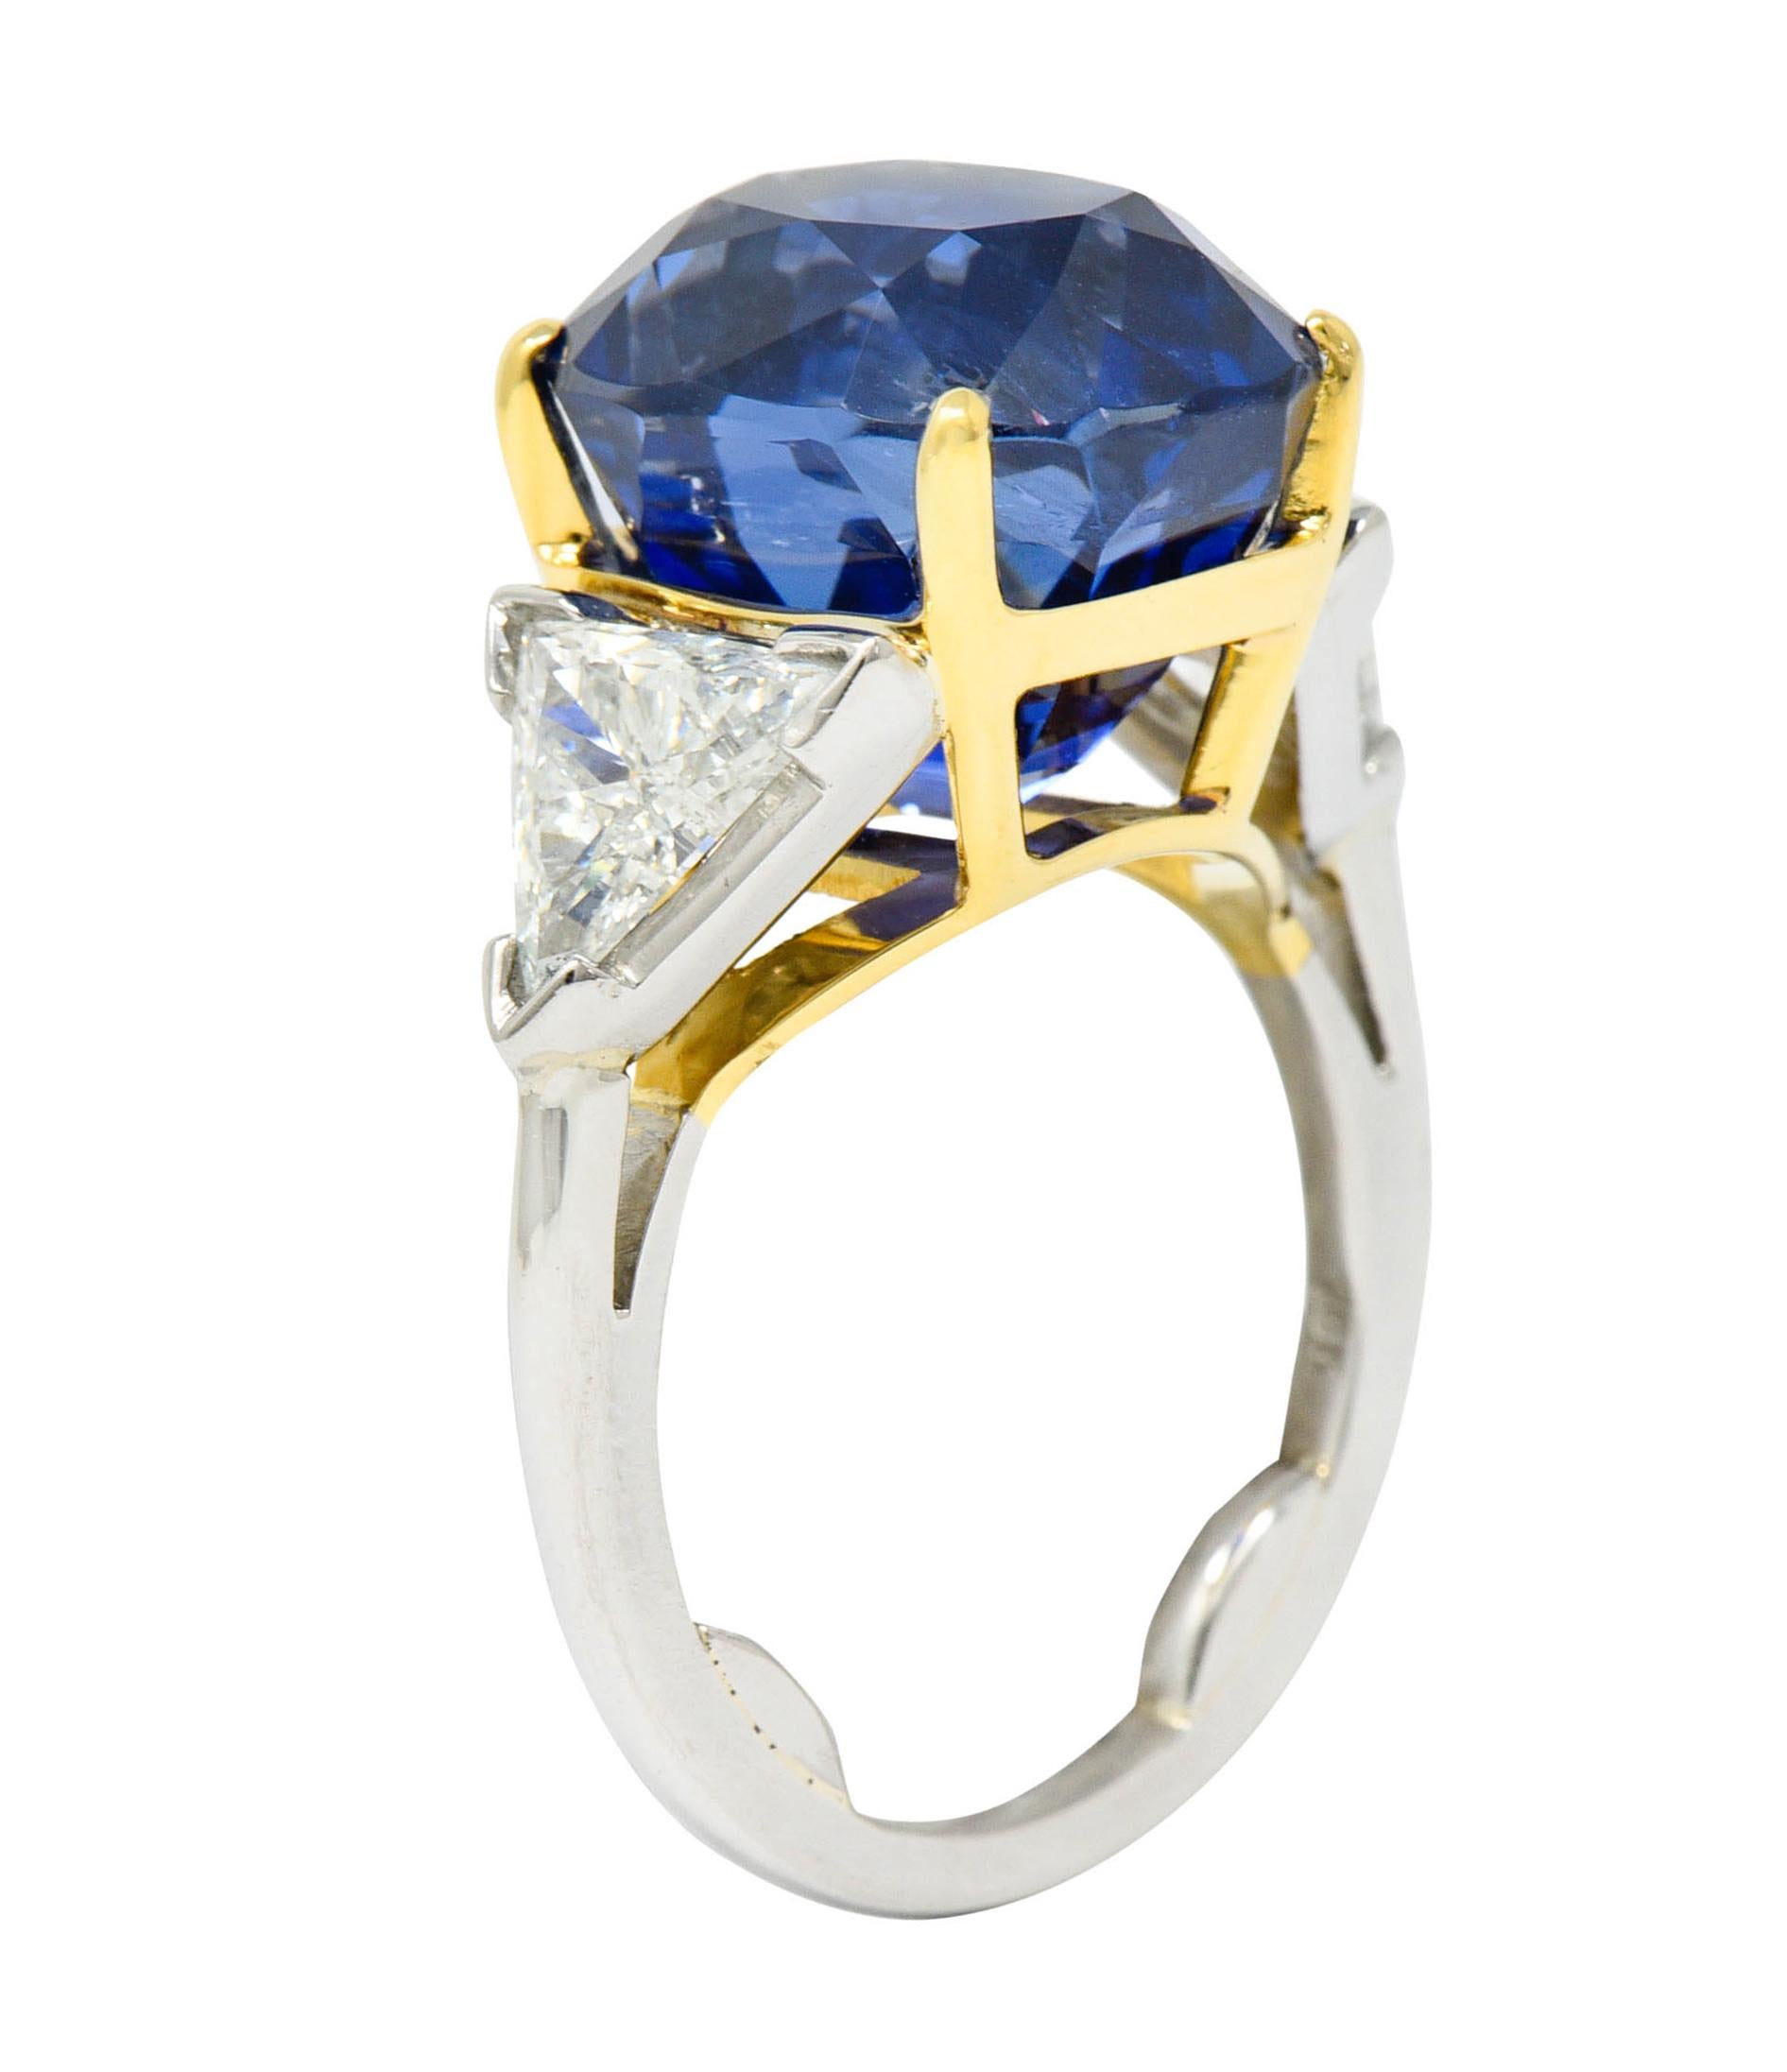 Centering an oval brilliant cut Ceylon sapphire weighing 20.06 carats

Deeply royal blue in color with no indications of heat - Sri Lankan in origin

Basket set in 18 karat gold and flanked by two trillion cut diamonds - V prong set in